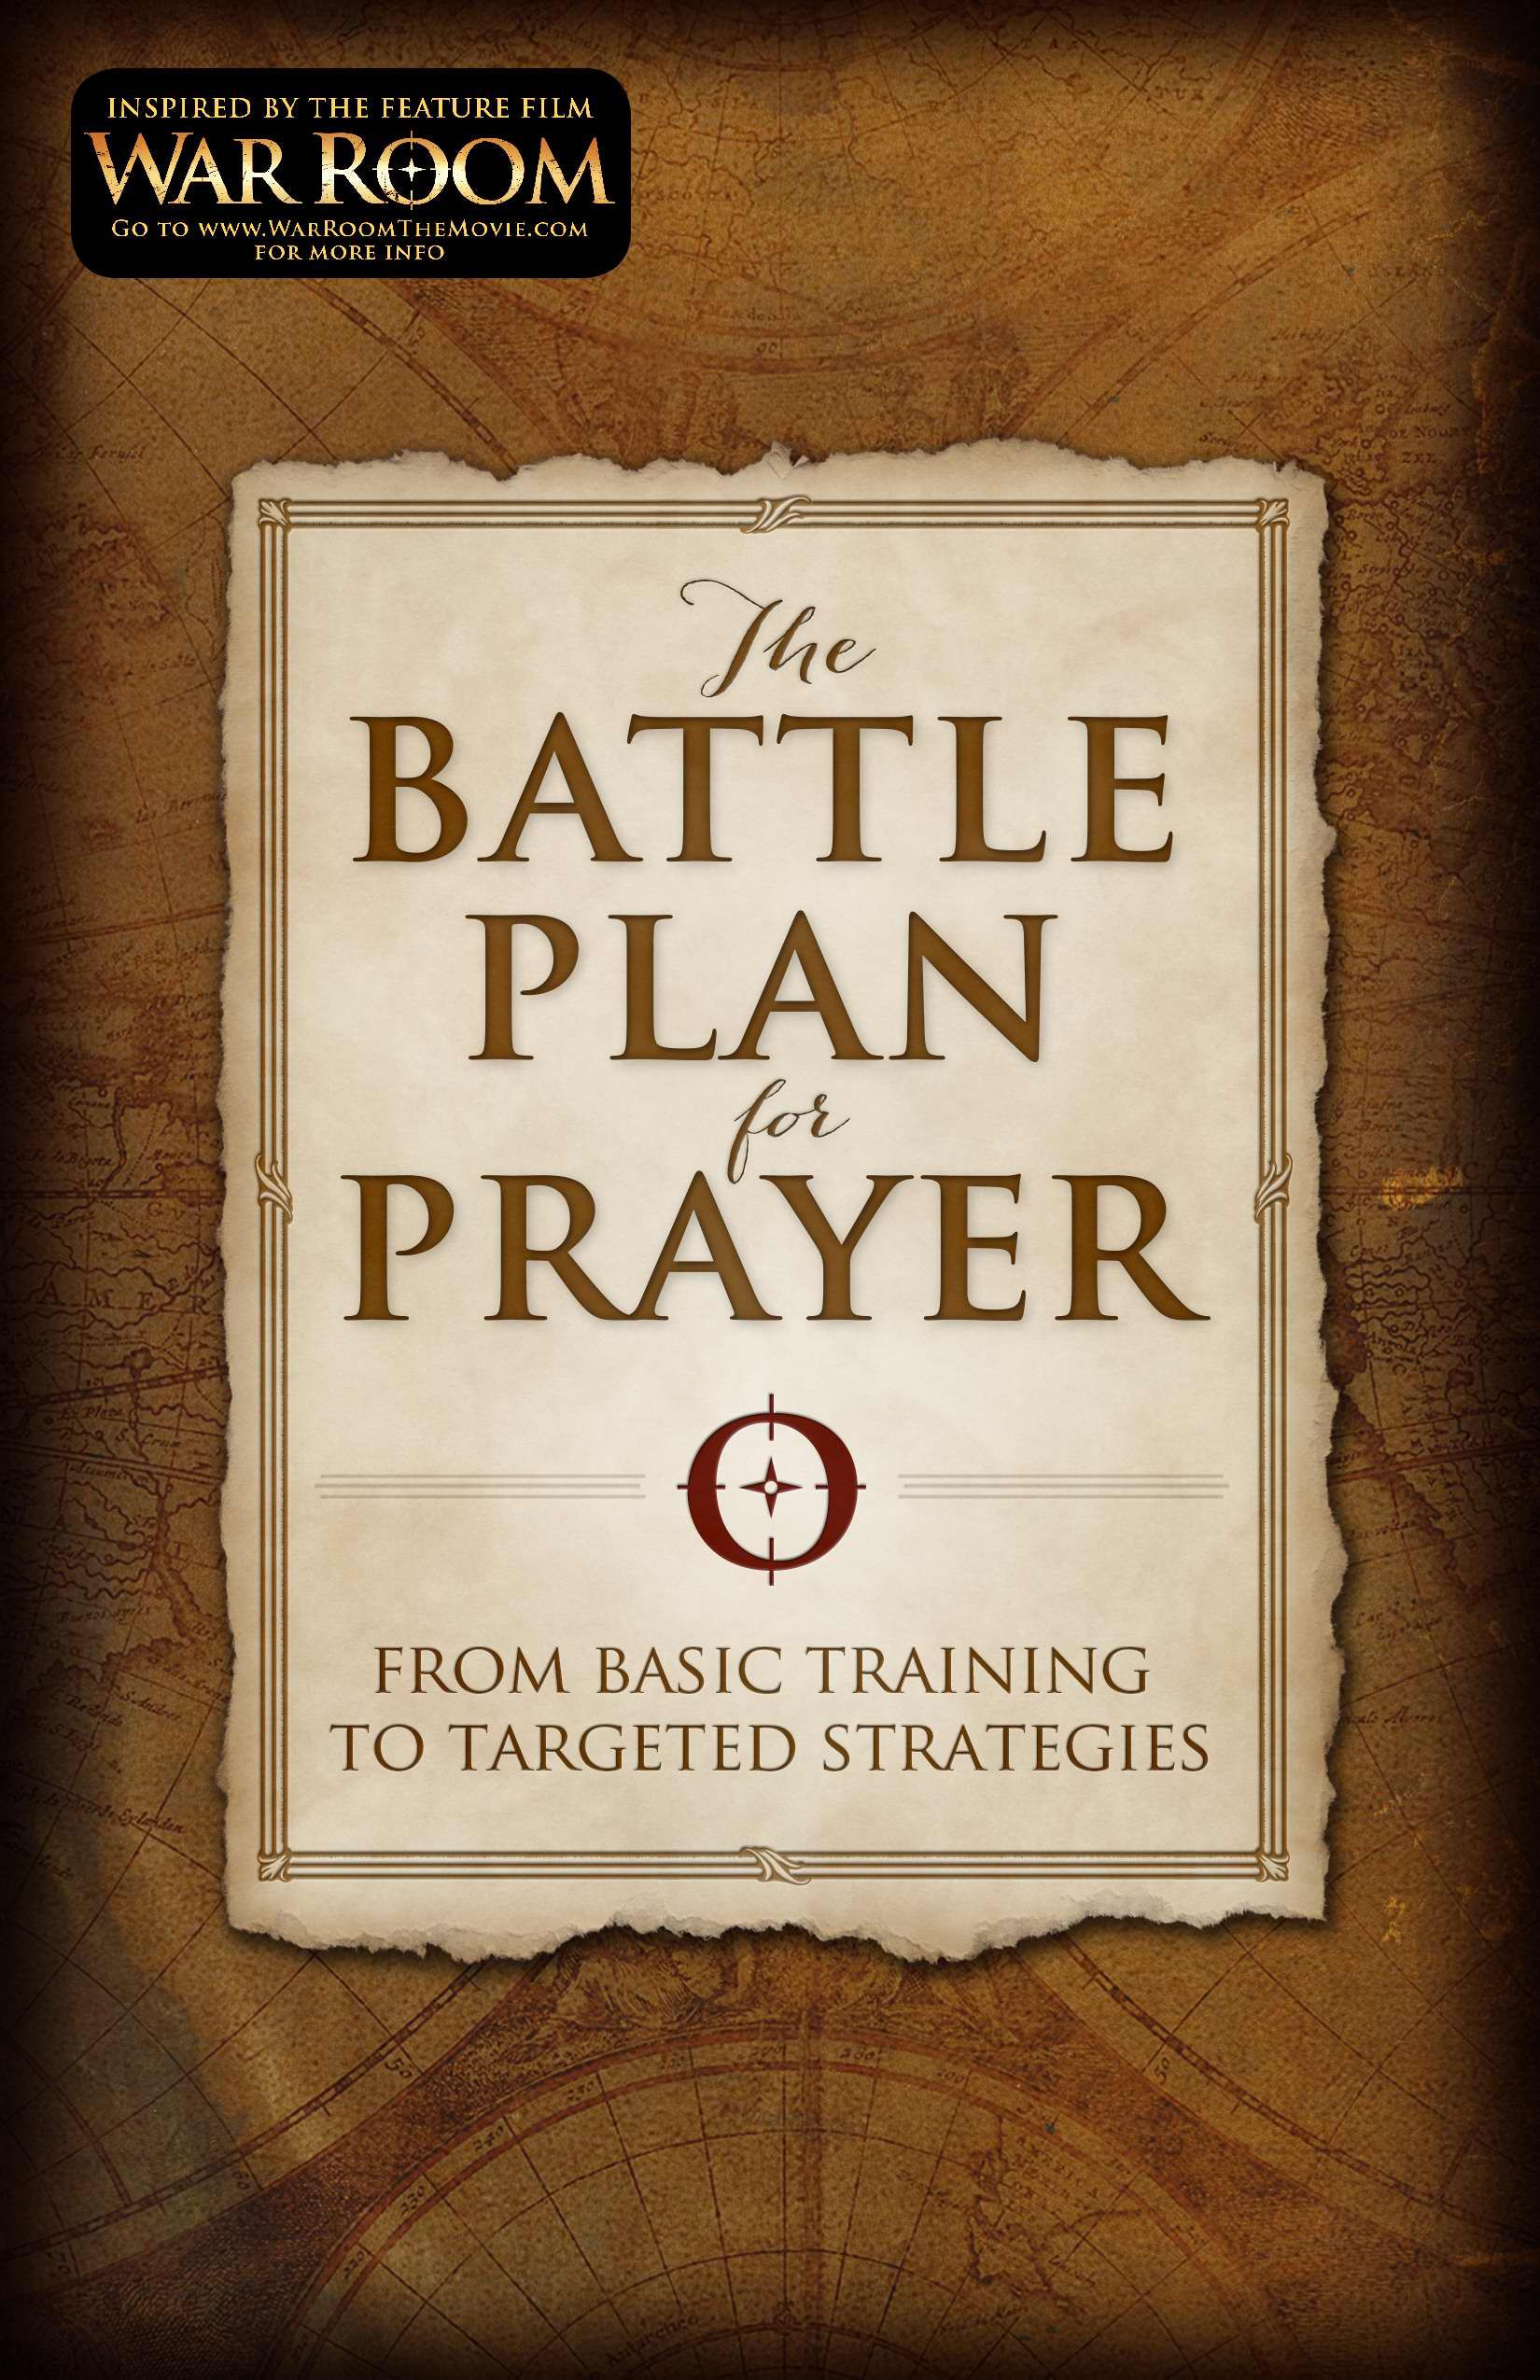 Image of The Battle Plan For Prayer other